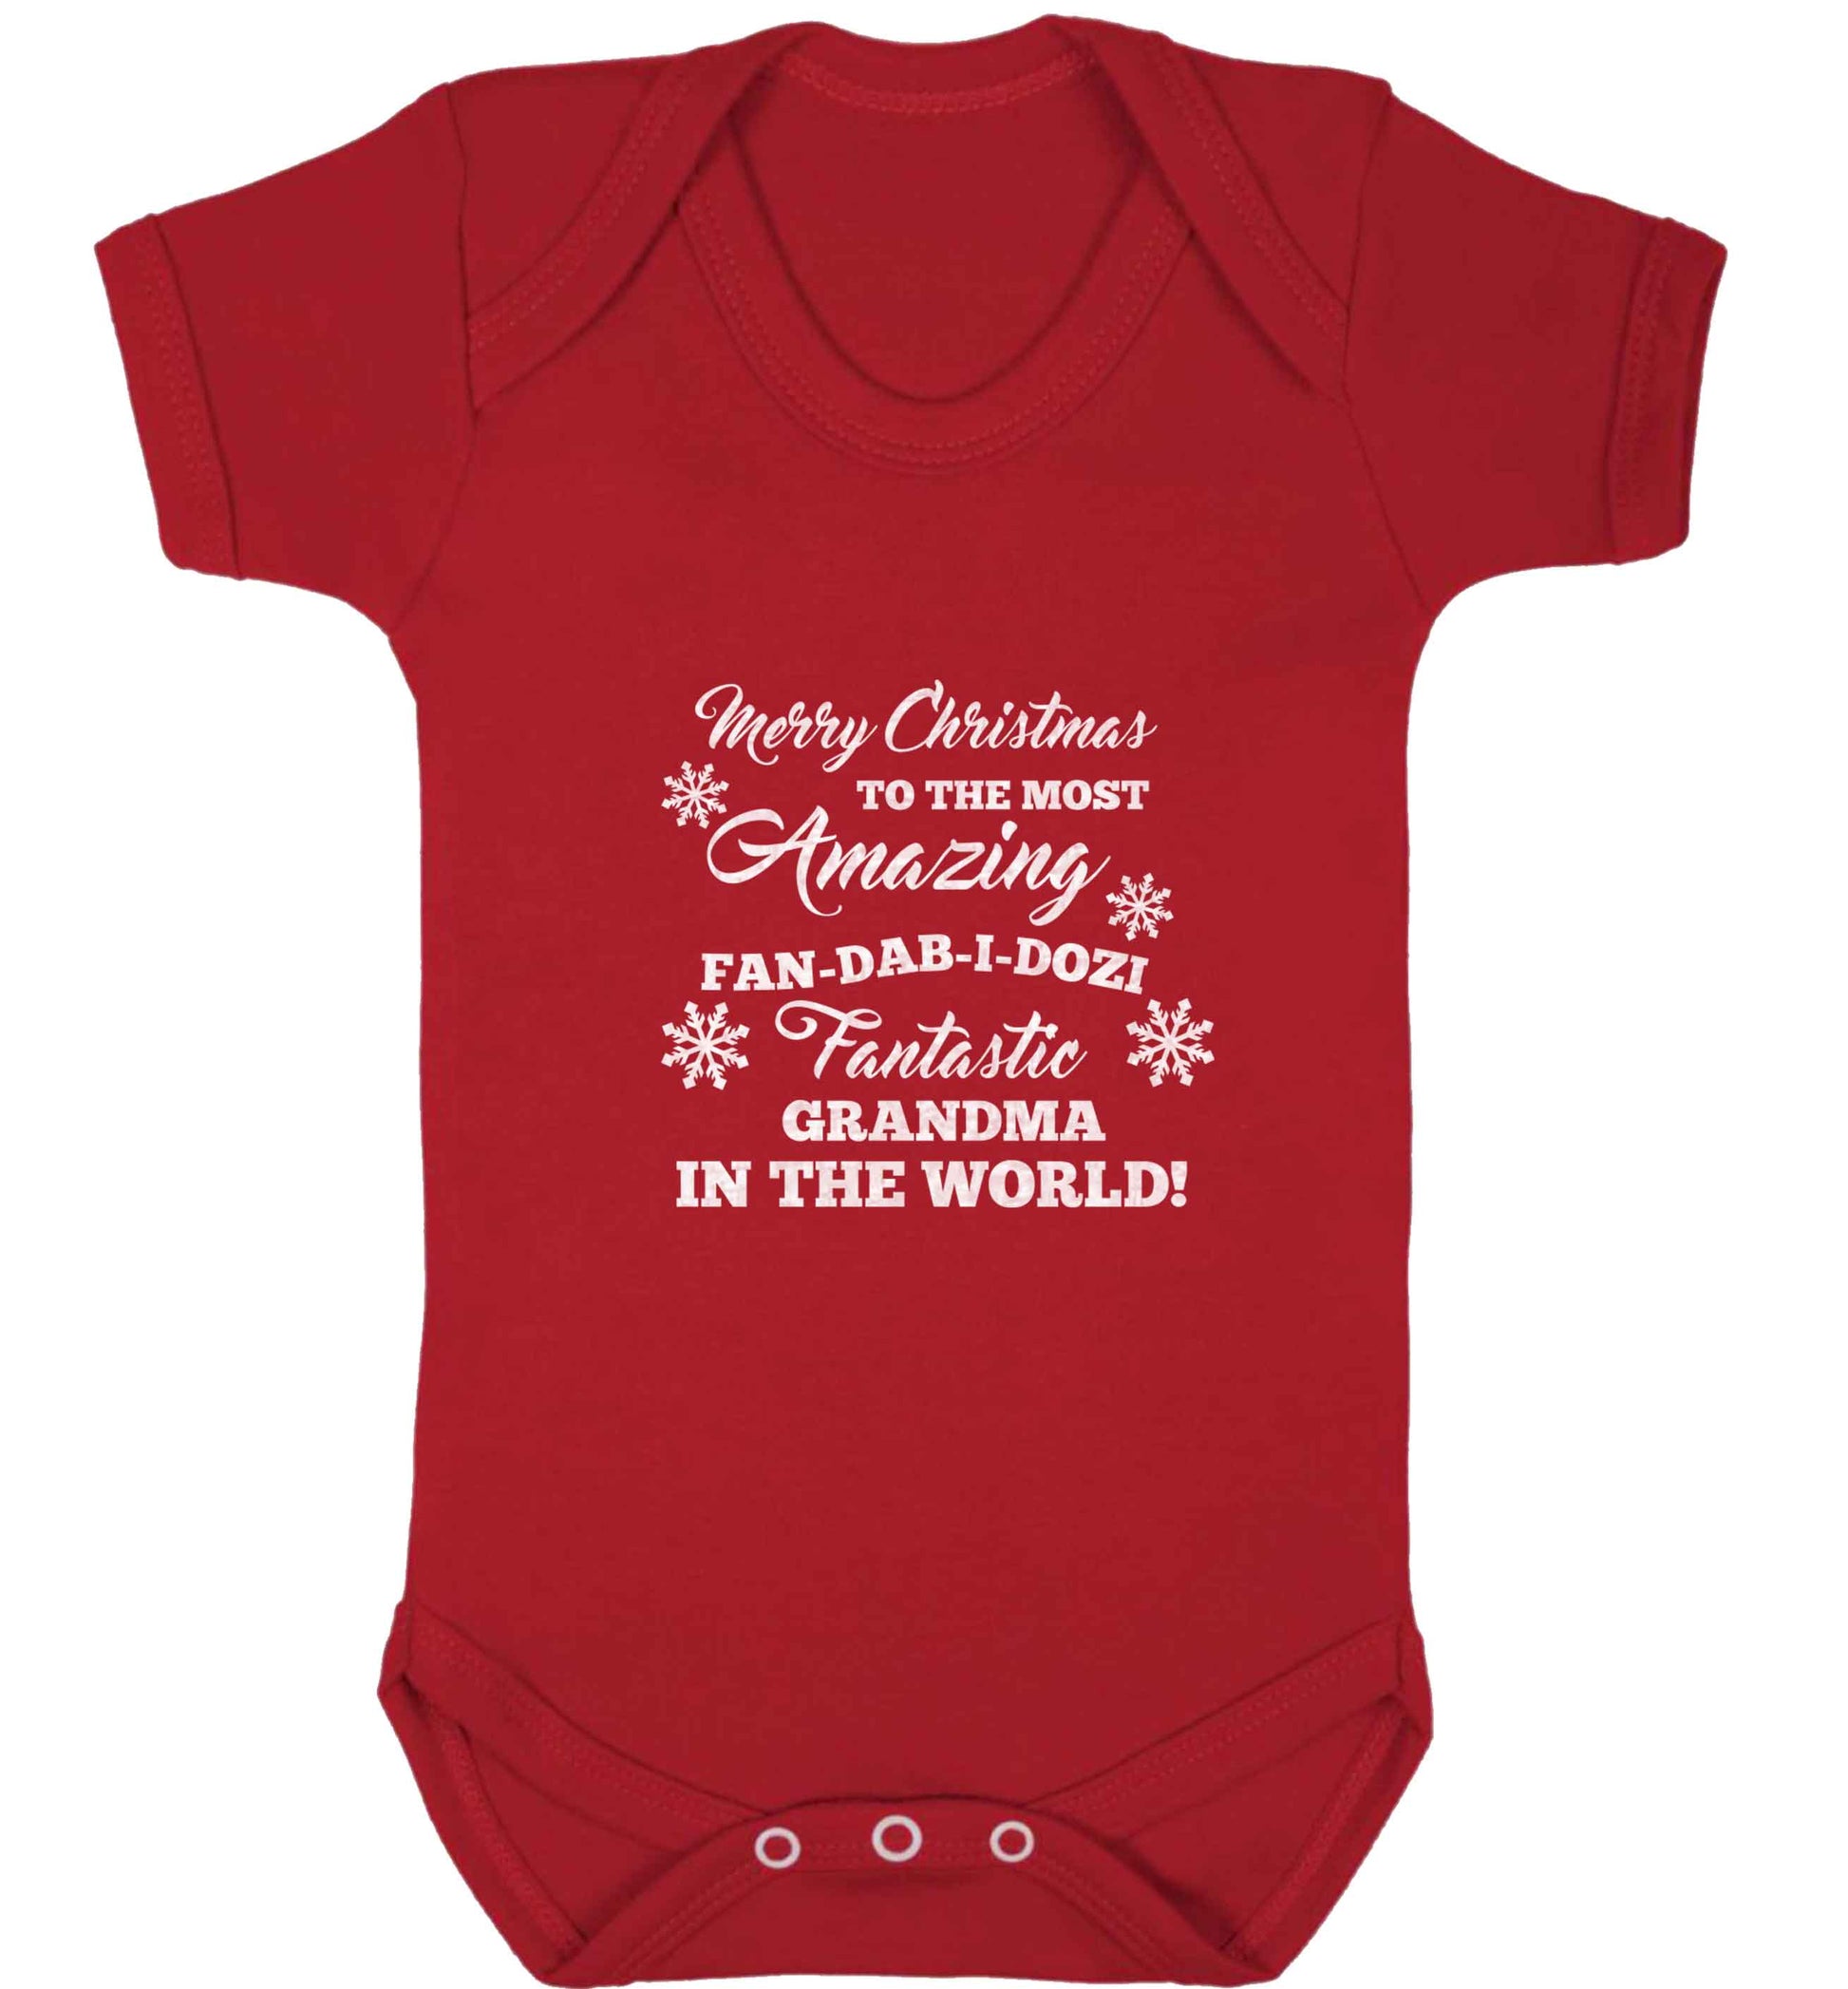 Merry Christmas to the most amazing fan-dab-i-dozi fantasic Grandma in the world baby vest red 18-24 months